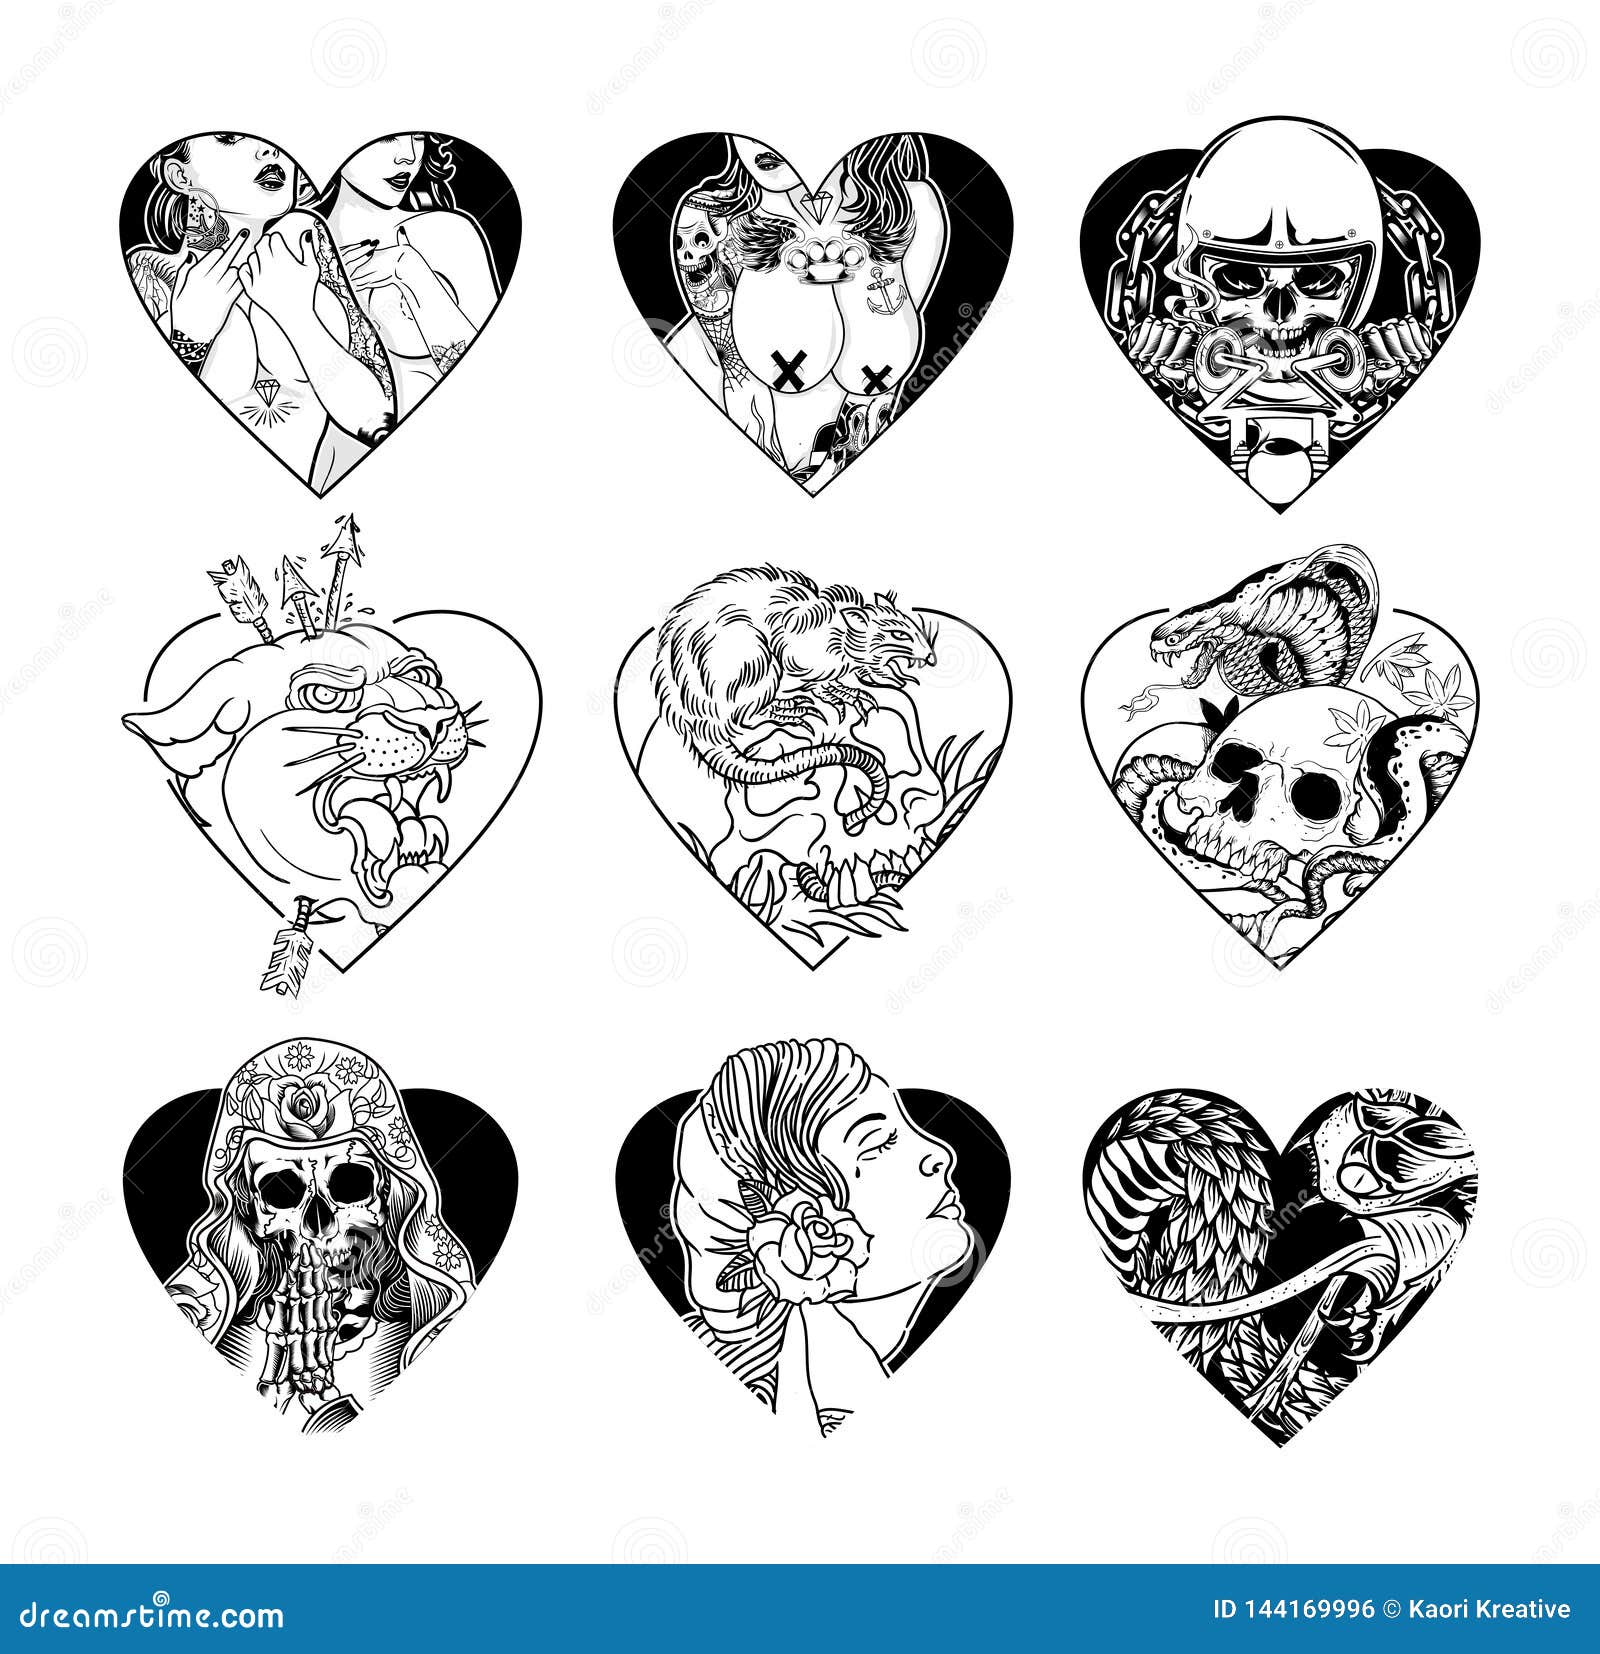 20 Iconic Crying Heart Tattoo Designs That Portray The Broken Heart   Psycho Tats